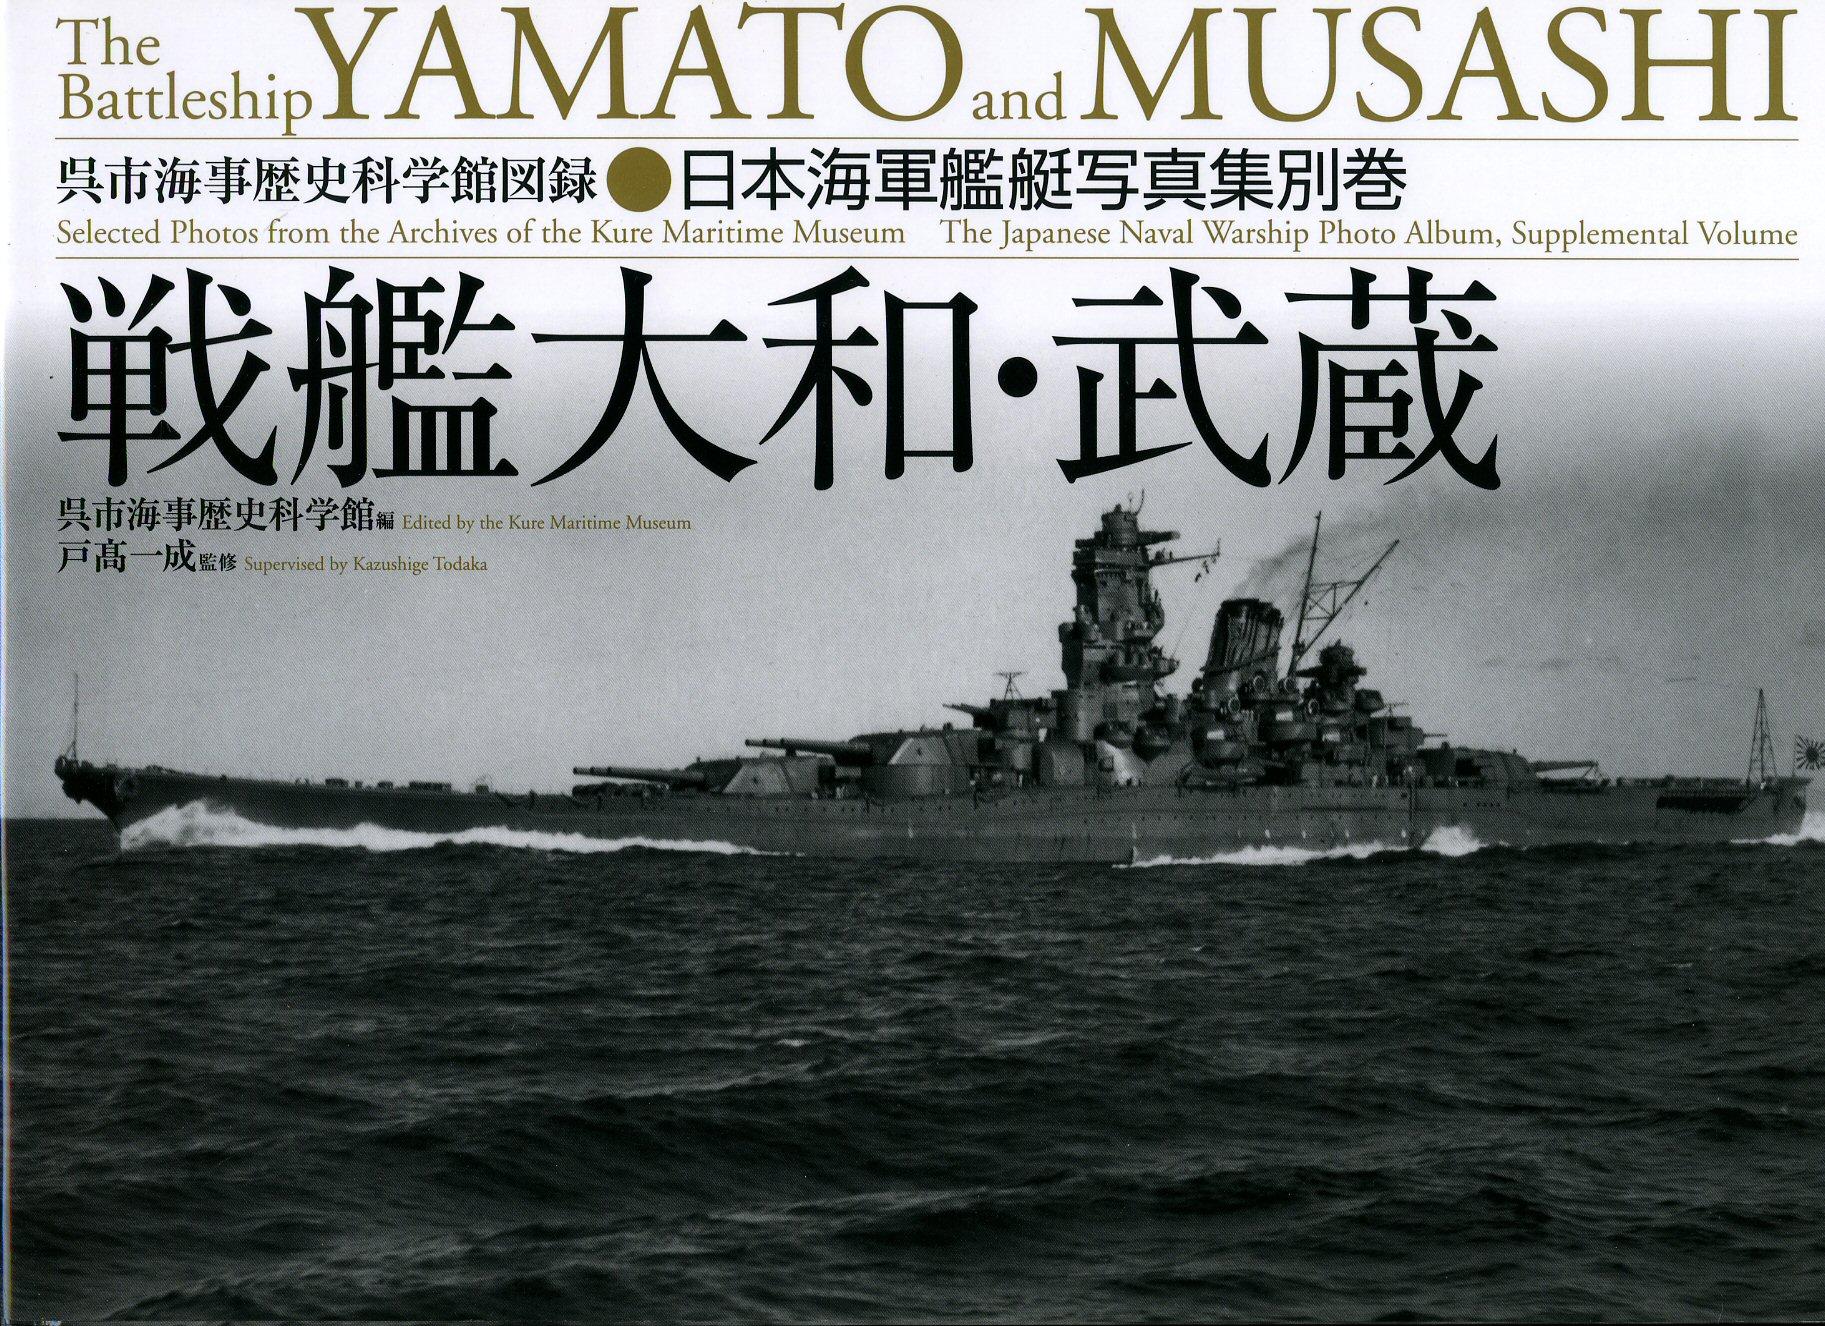 Japanese Naval Warship Photo Album The Battleship Yamato and Musashi; Selected Photographs from the Archives of the Kure Maritime Museum and the Best from the Collection of Shizuo Fukui's Photos of Japanese Warships Supplemental Volume - Kazushige Todaka [Supervisor] Edited by the Kure Maritime Museum